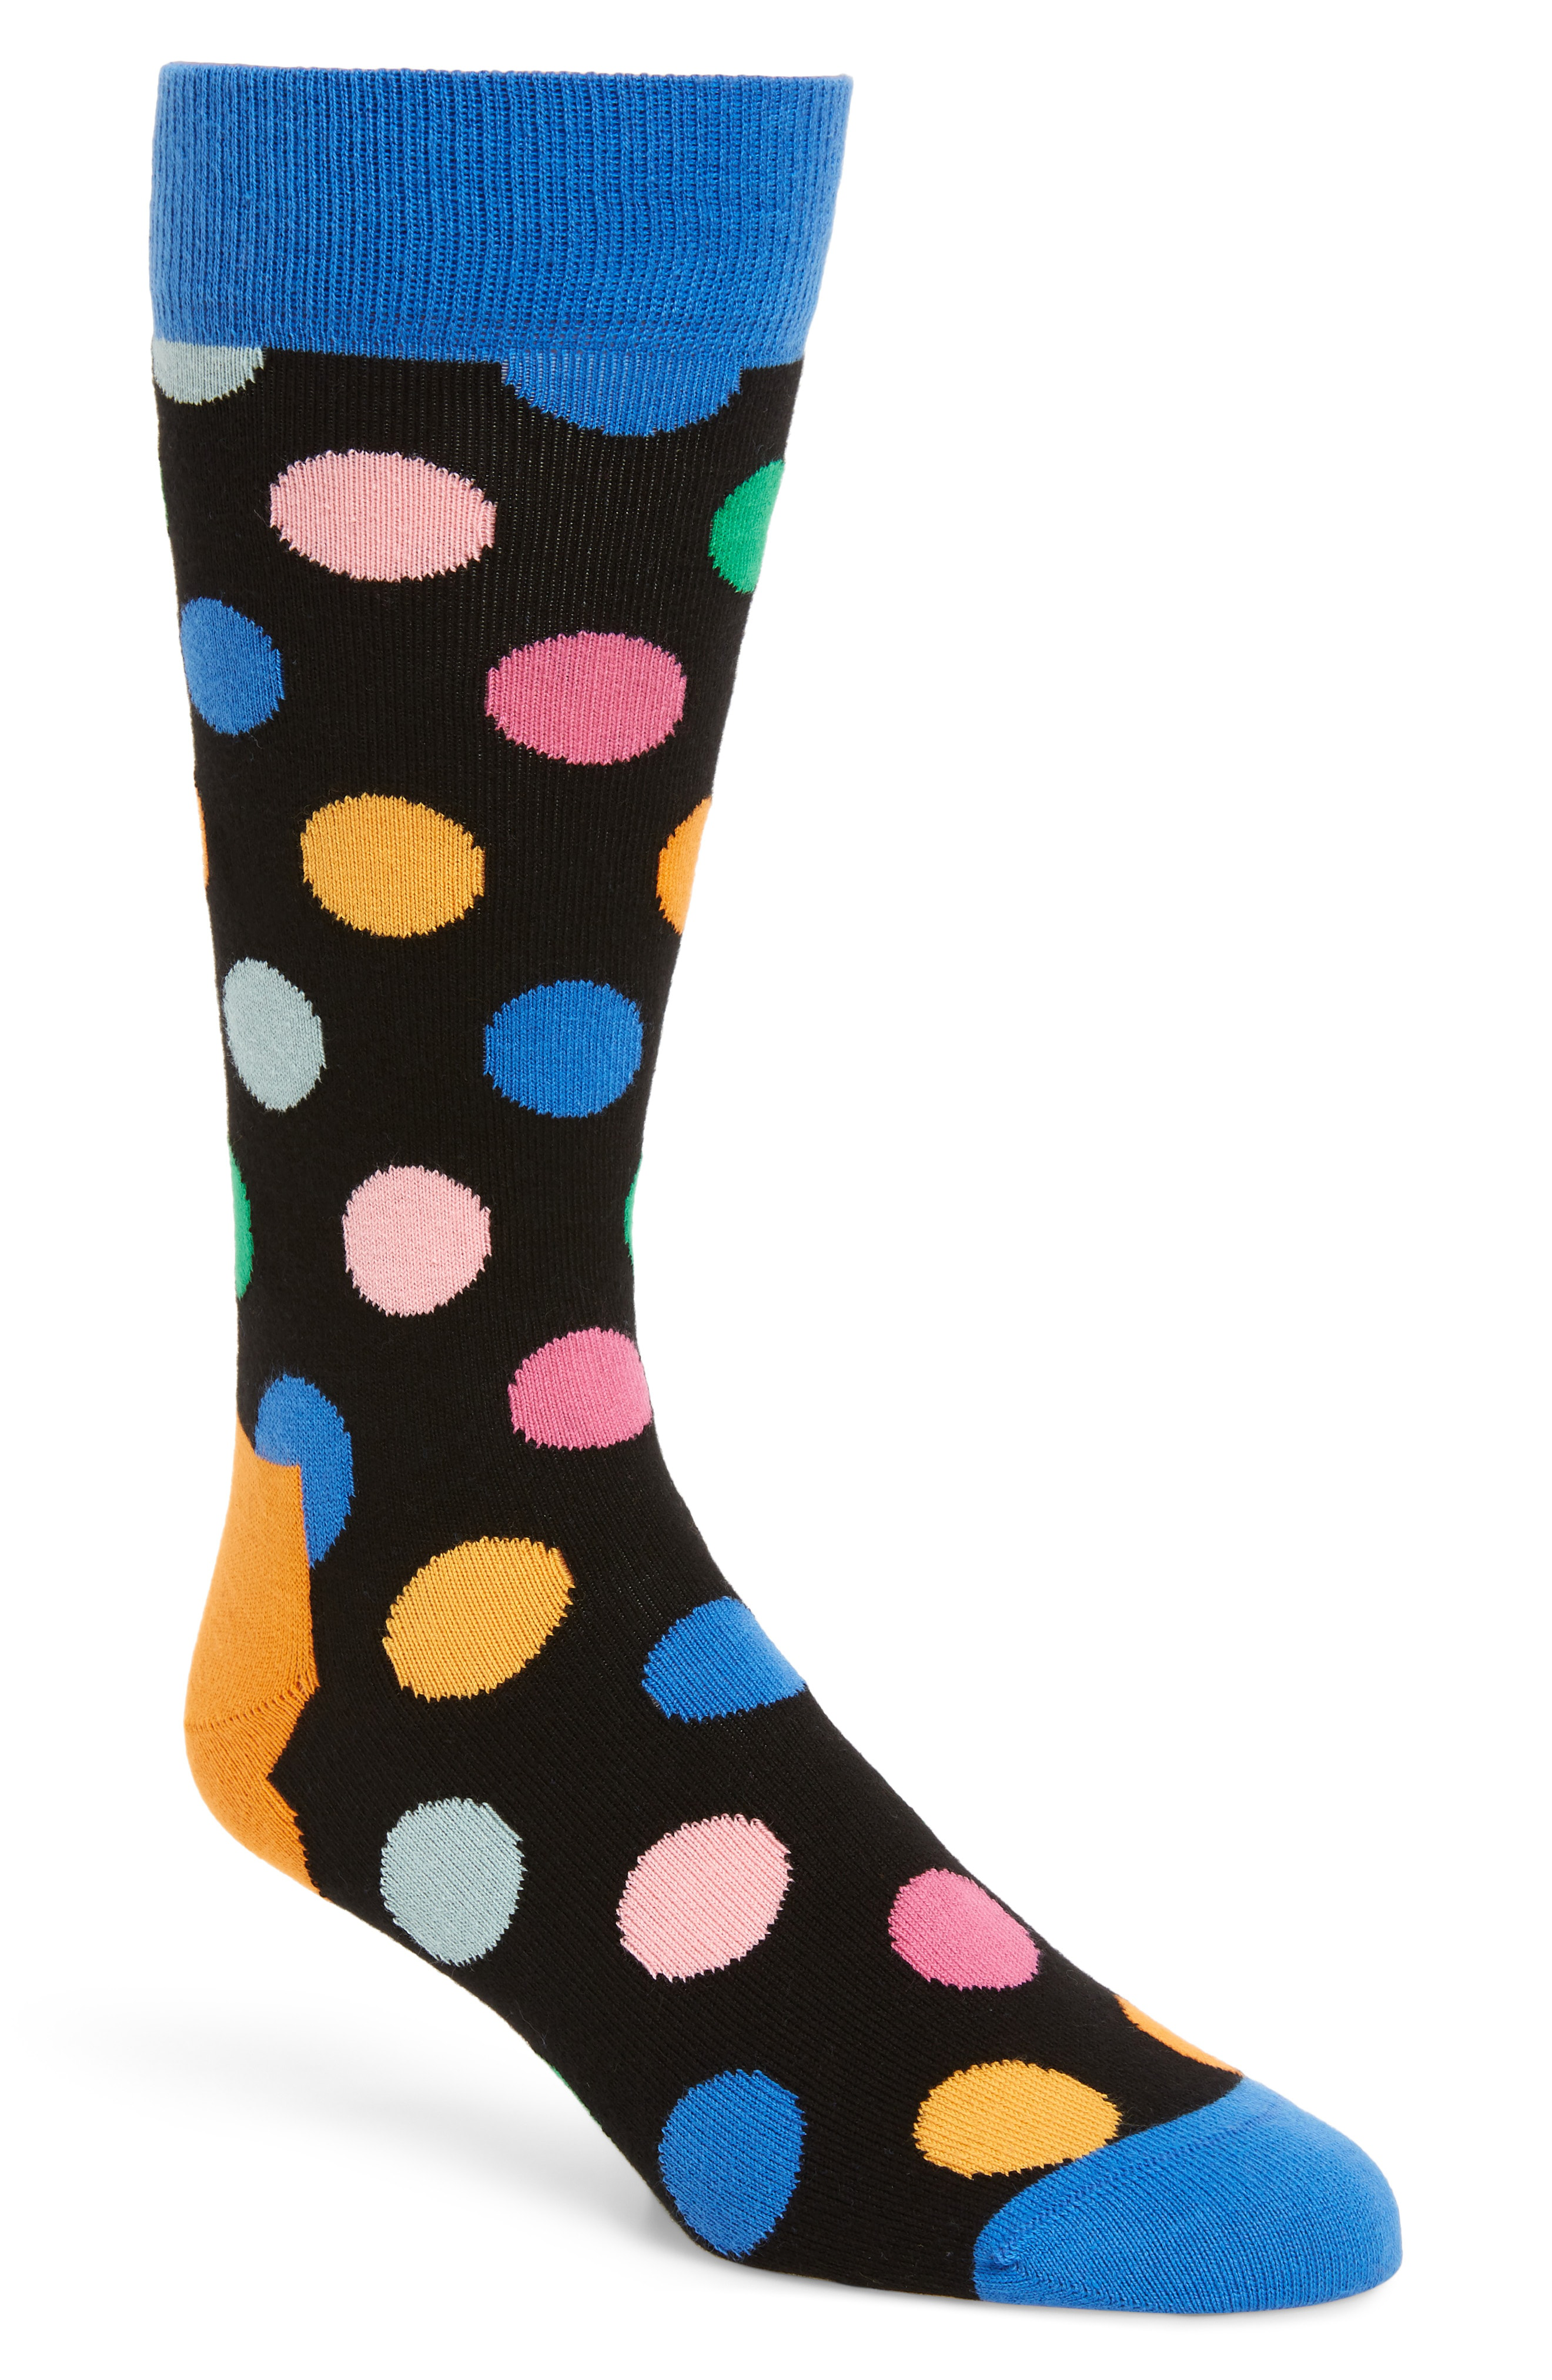 BNWT Happy Socks Big Dot Trainer Liner Chaussettes Bleu Marine Taille 7 1//2-11 1//2